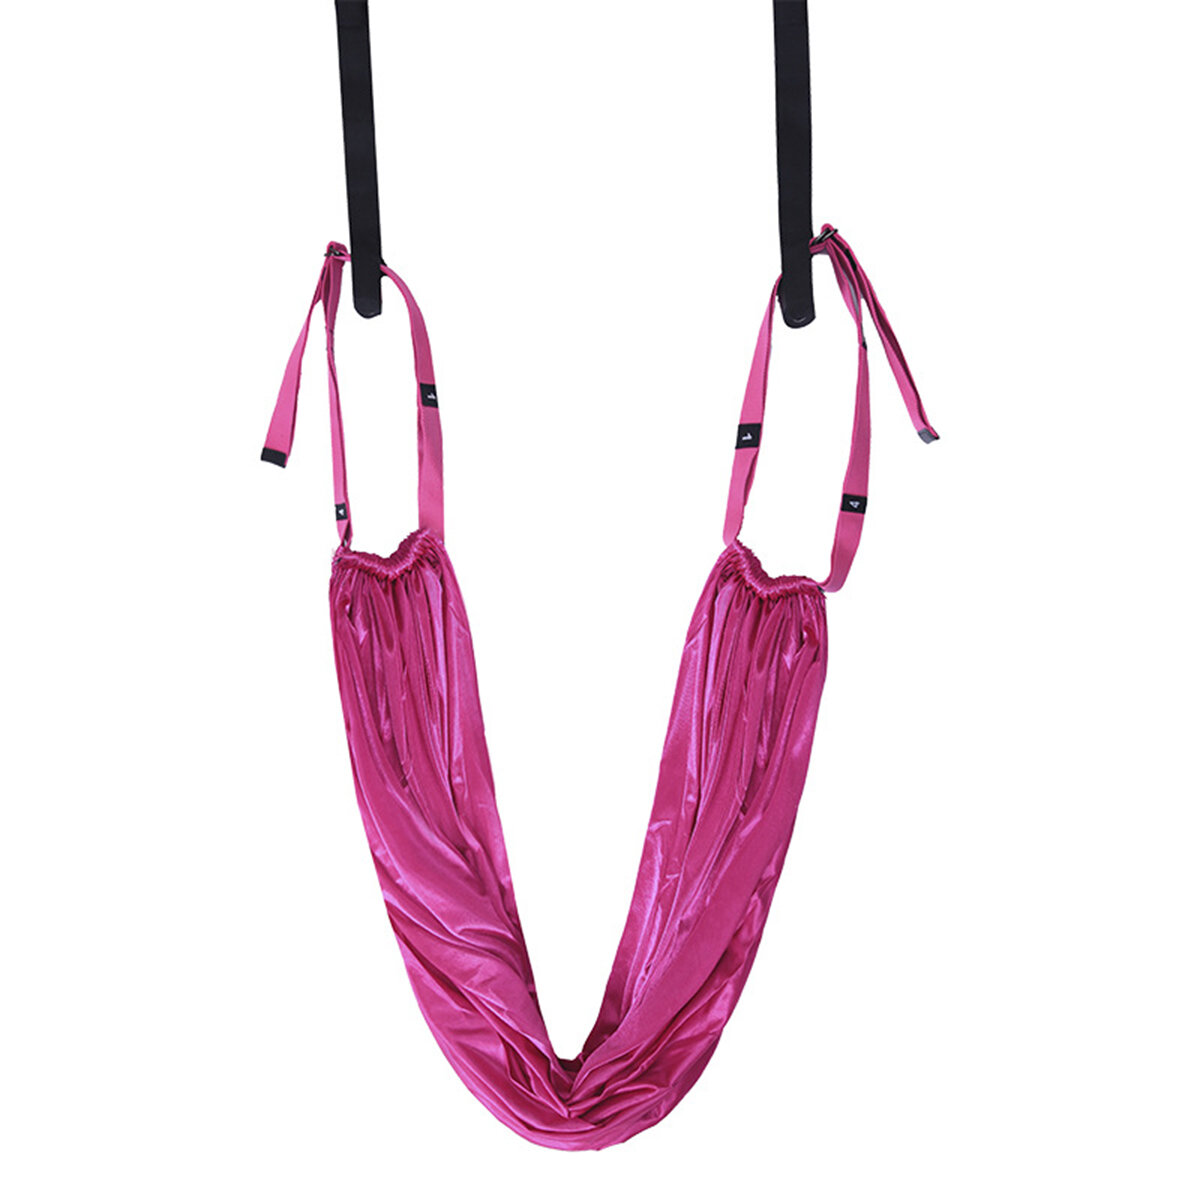 

Aerial Yoga Fitness Hammock Door Swing Trapeze Elastic Stretch Strap Workout Sling